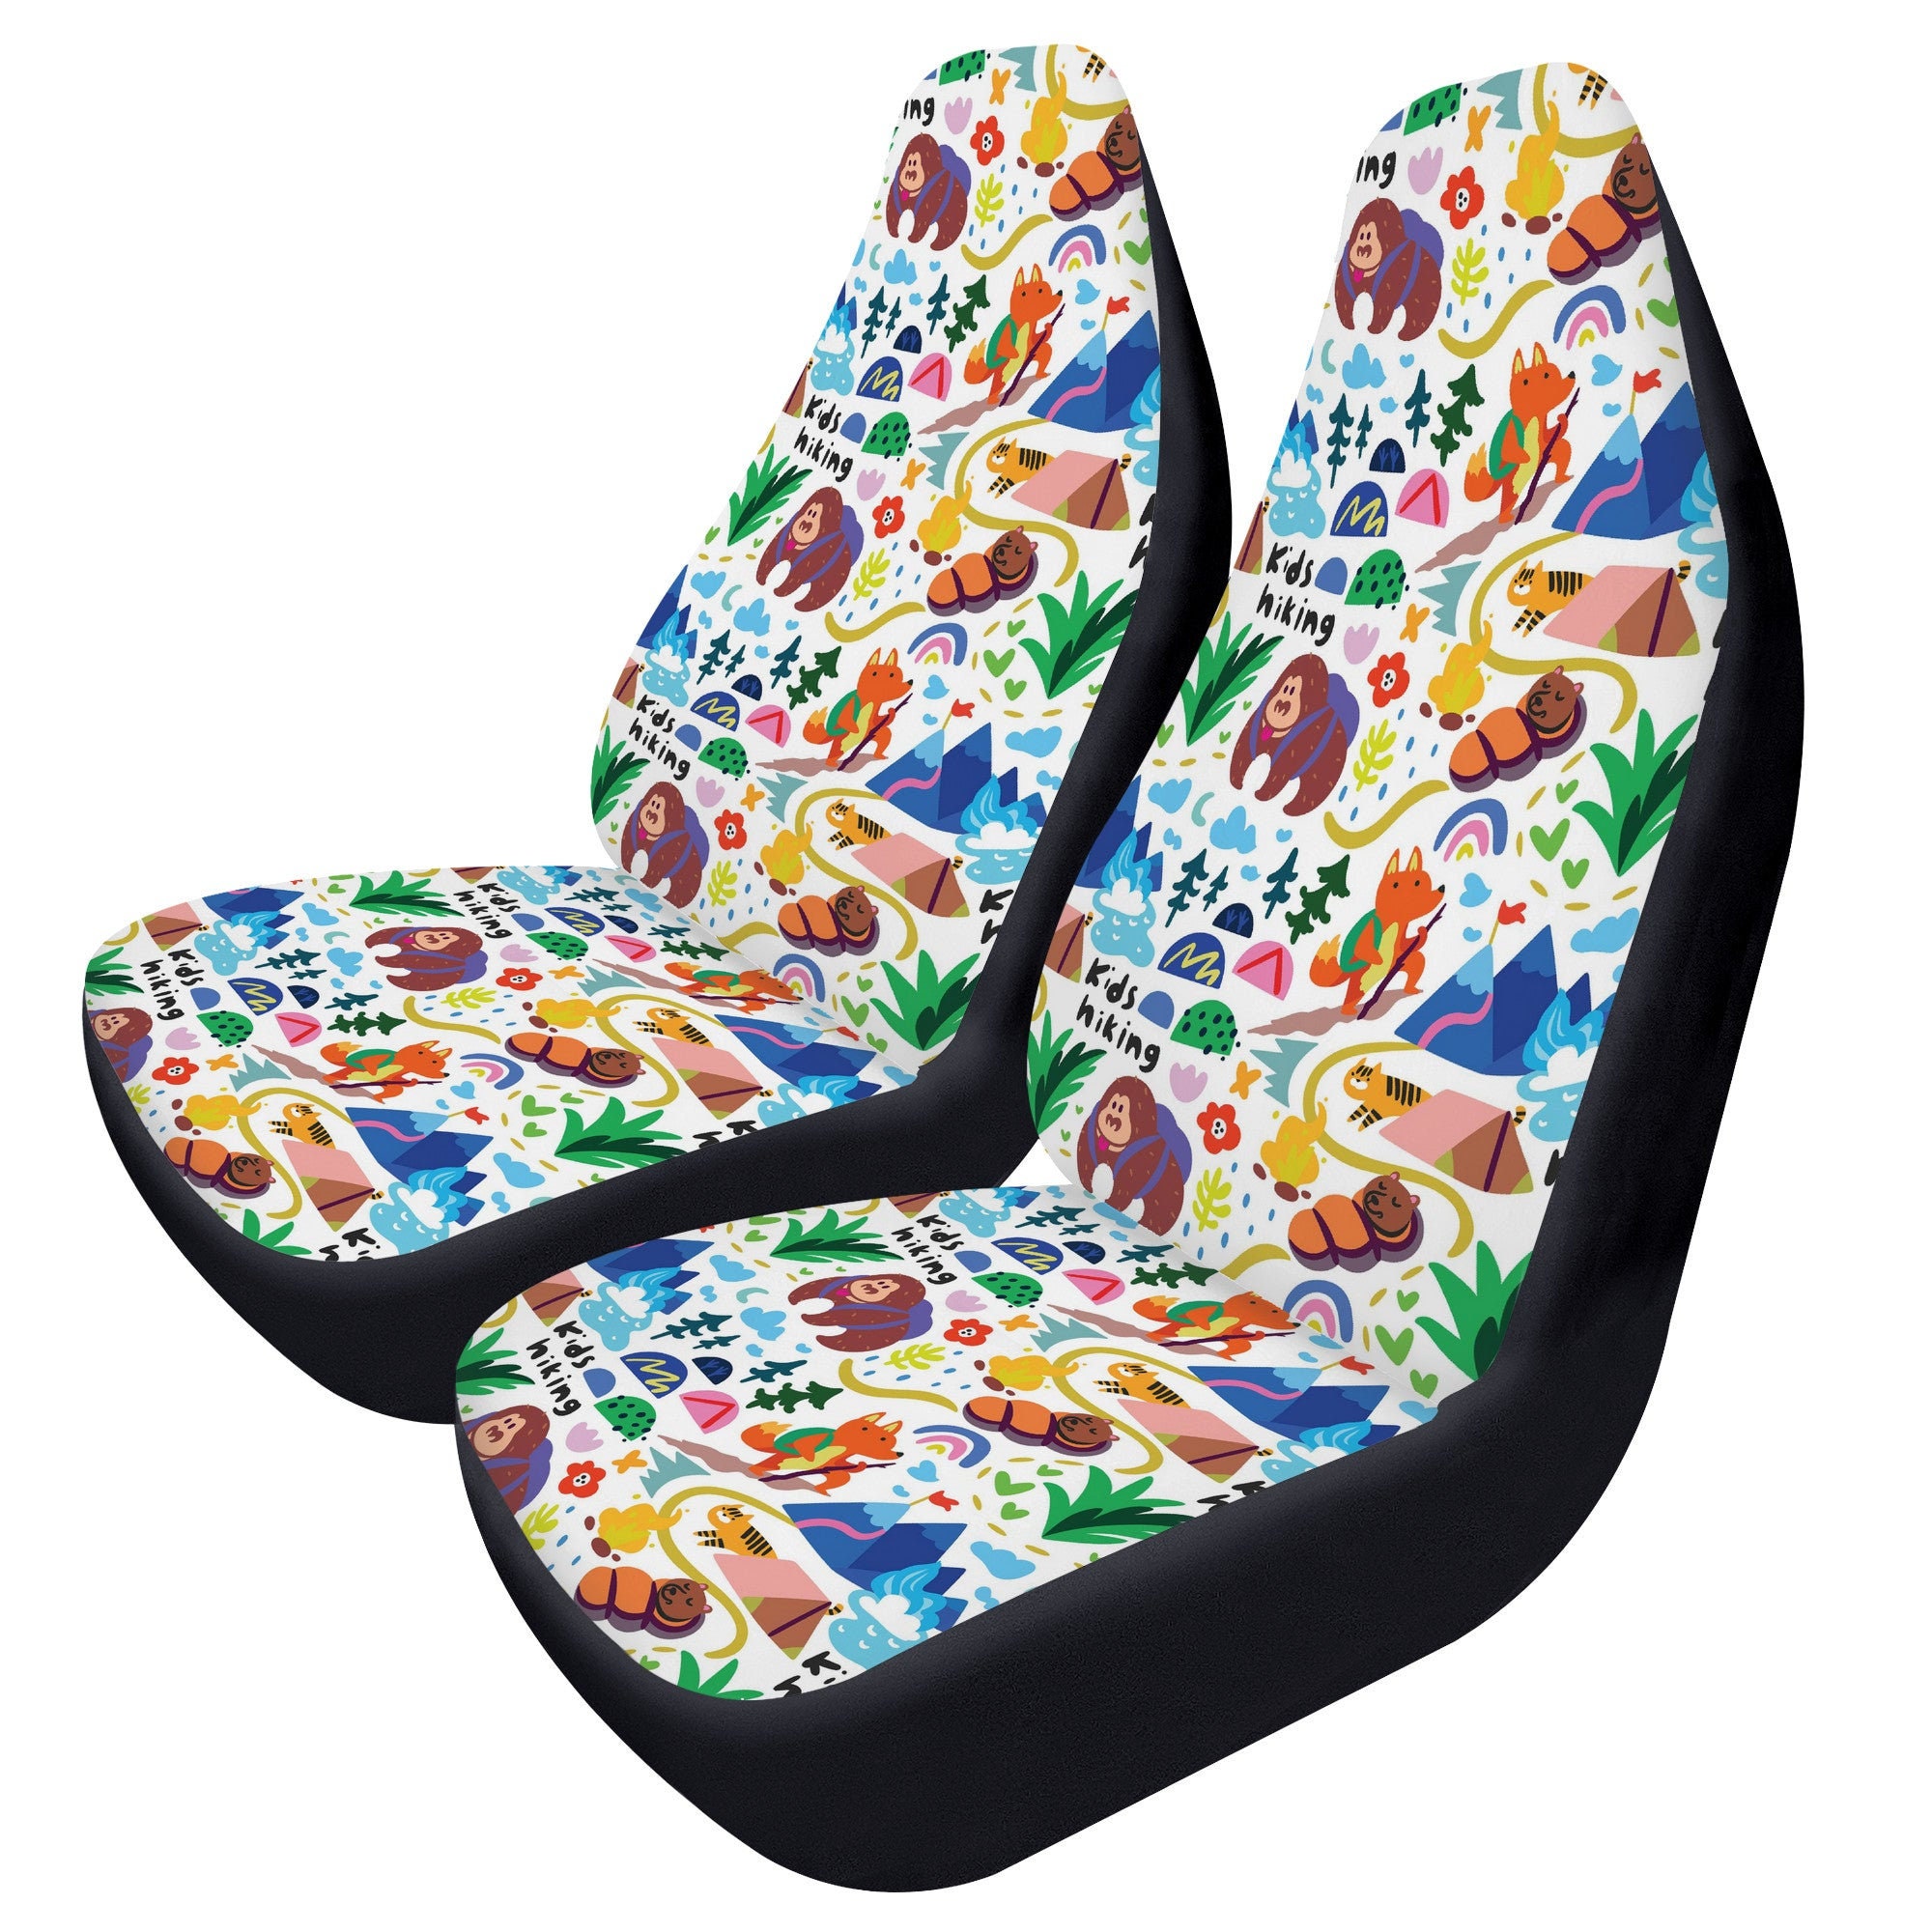 Cute Camping Theme Car Seat Cover For Vehicle | Kawaii Seat Covers